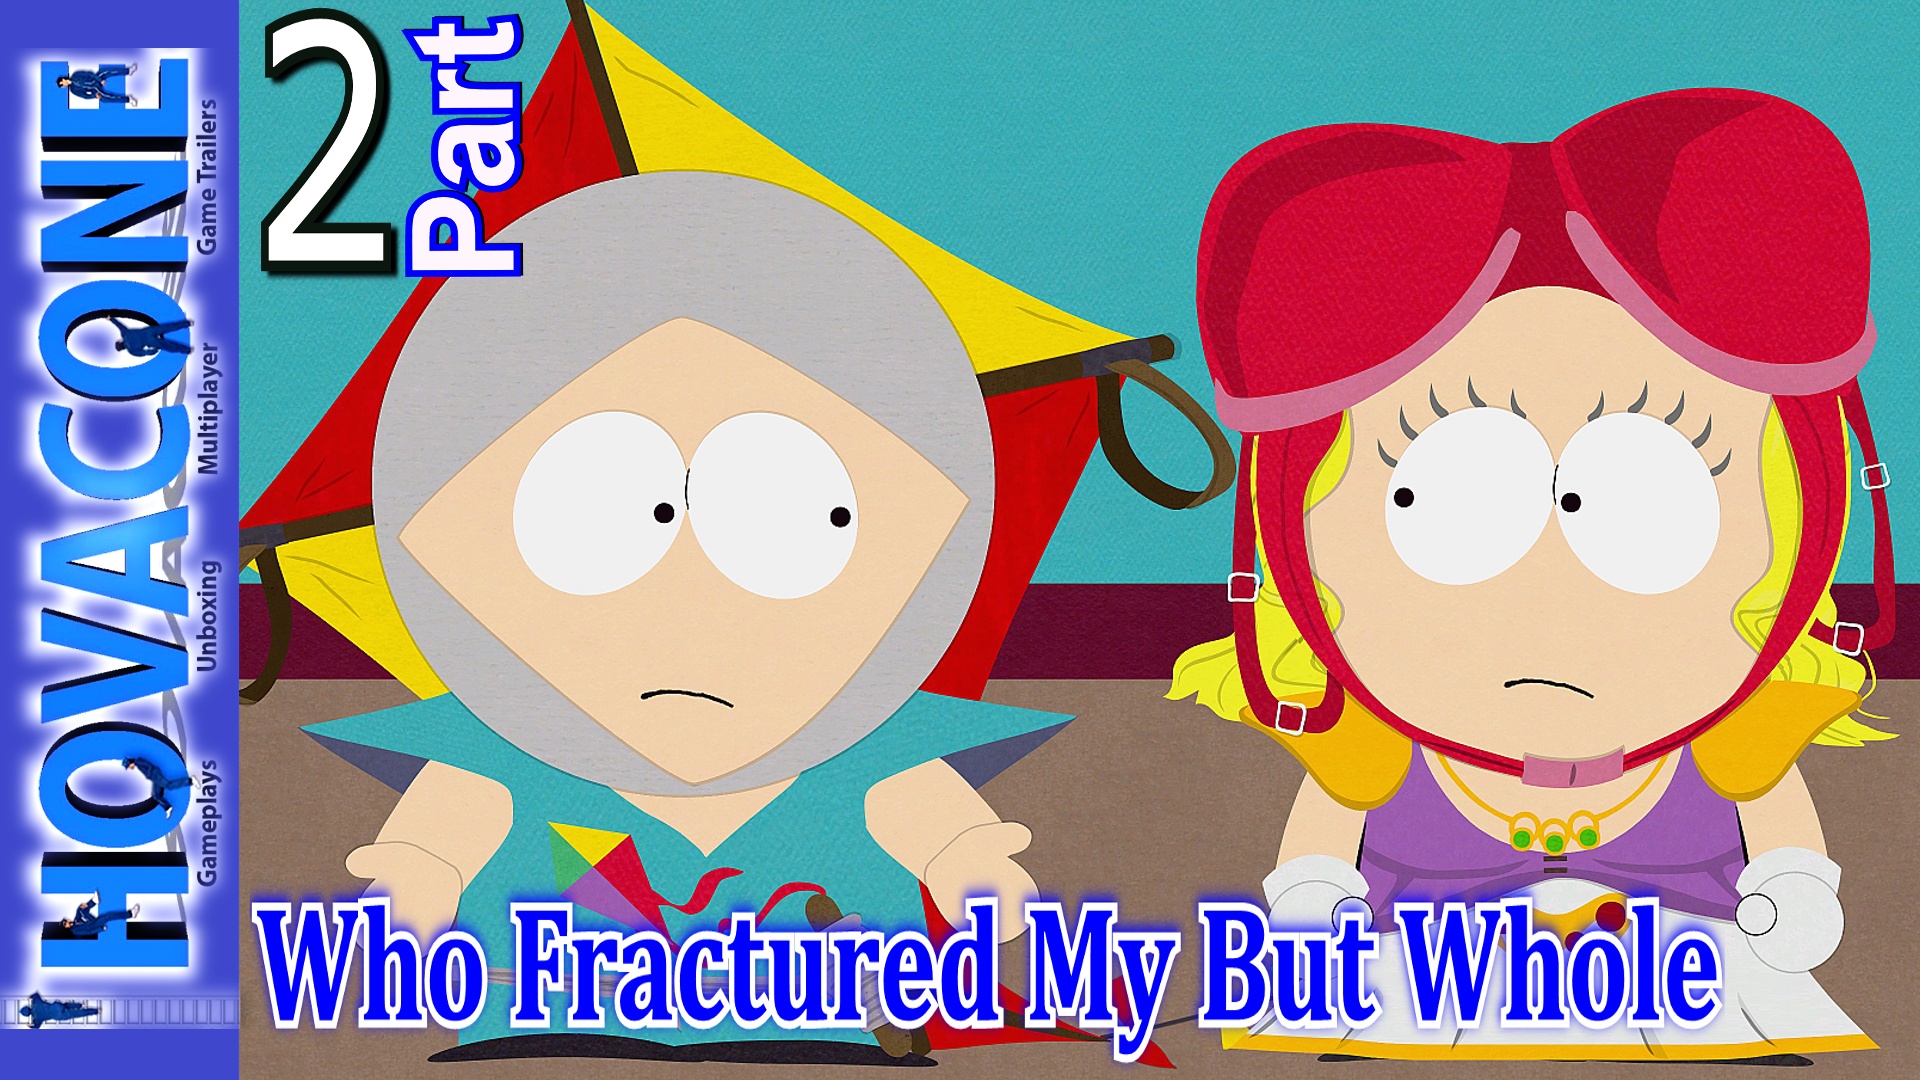 south park fractured but whole free